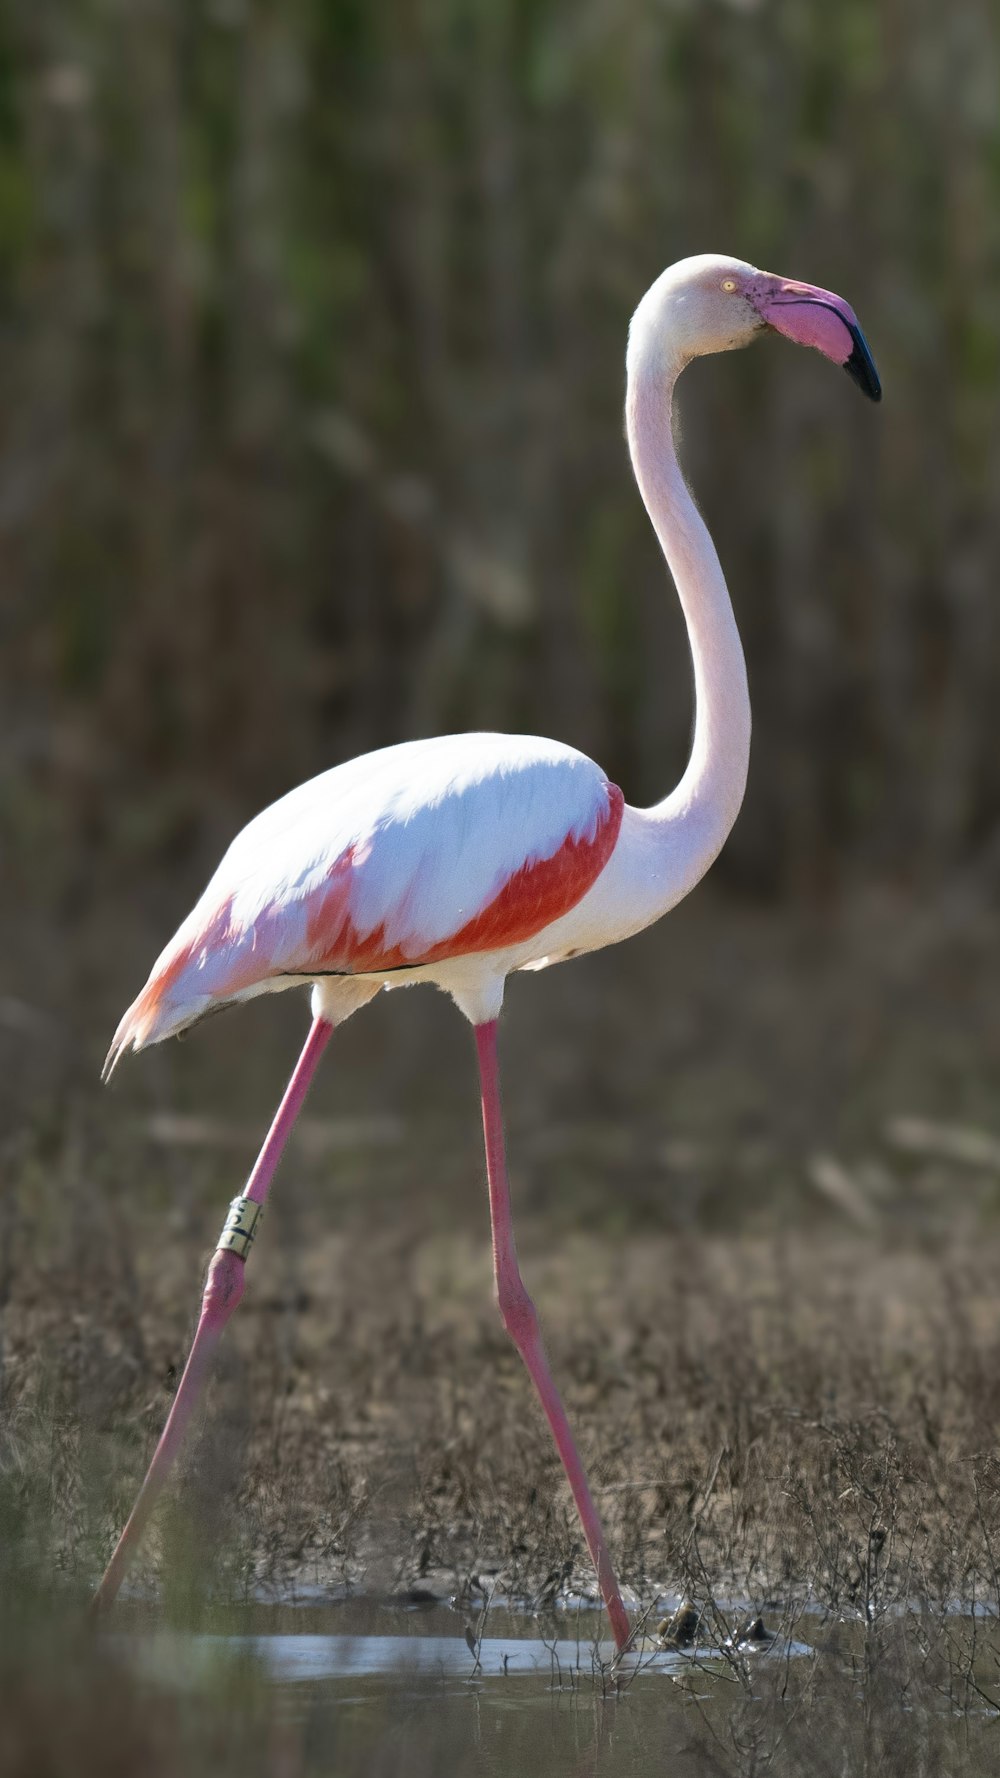 a pink and white bird standing in a body of water